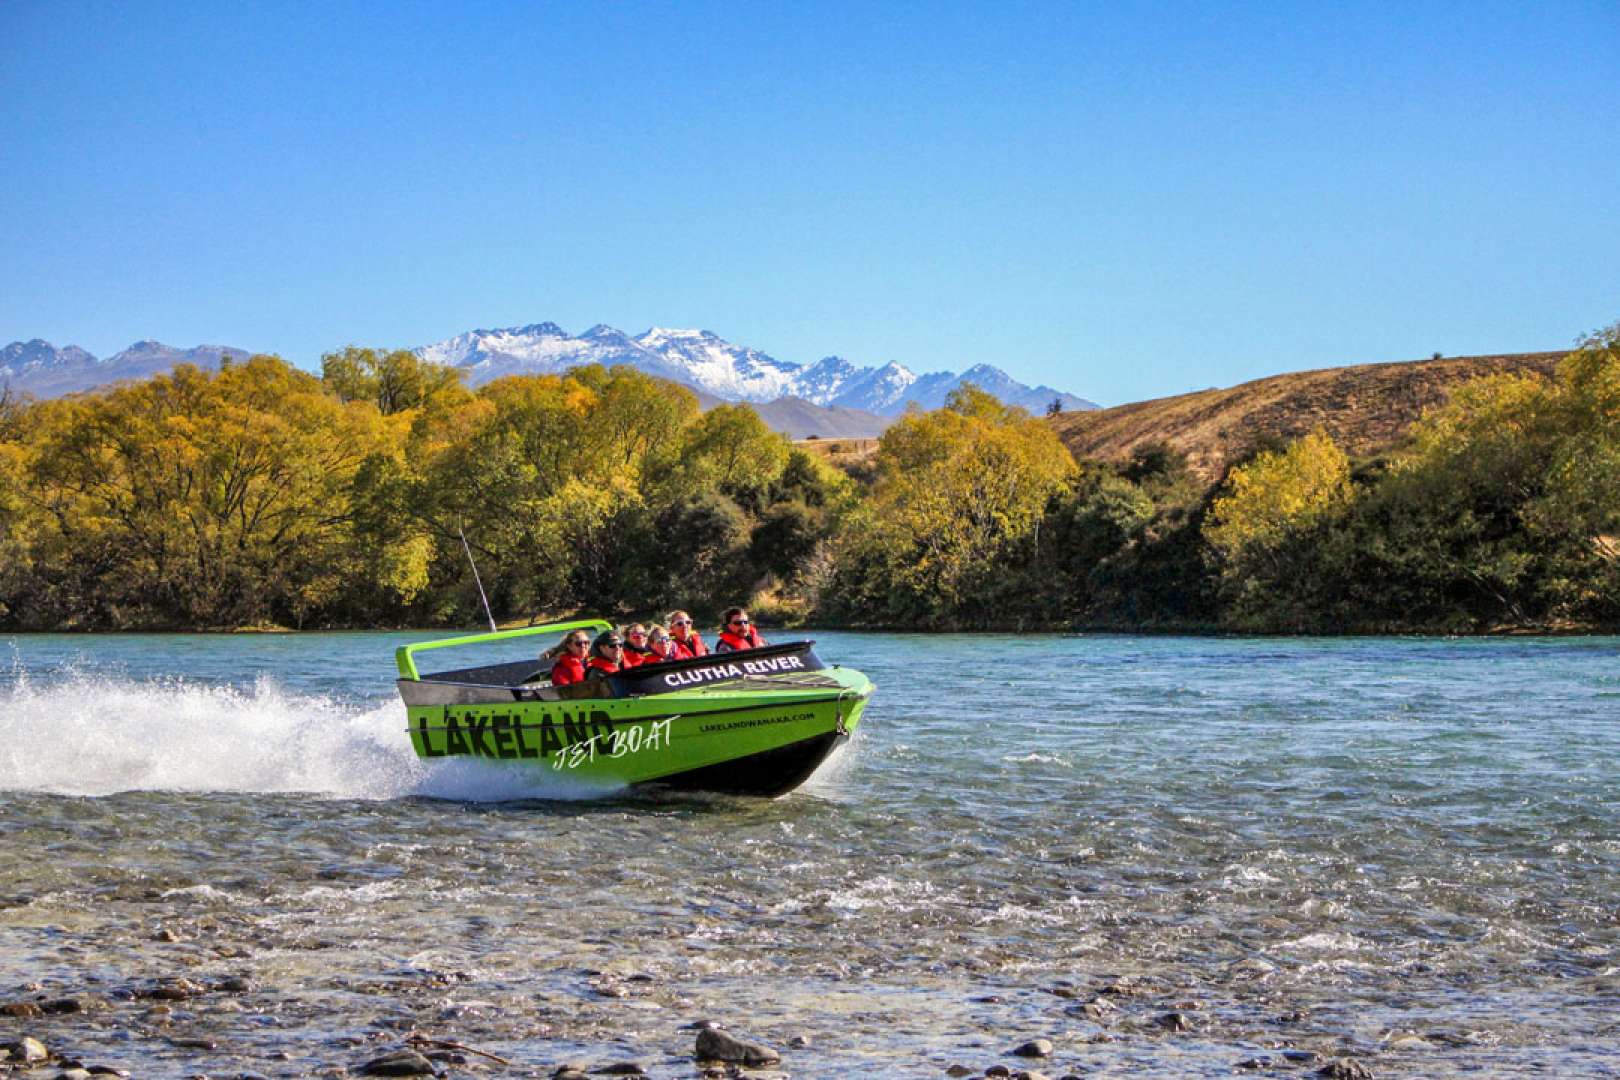 A Wild Ride on World Famous Lake Wanaka and the Clutha River